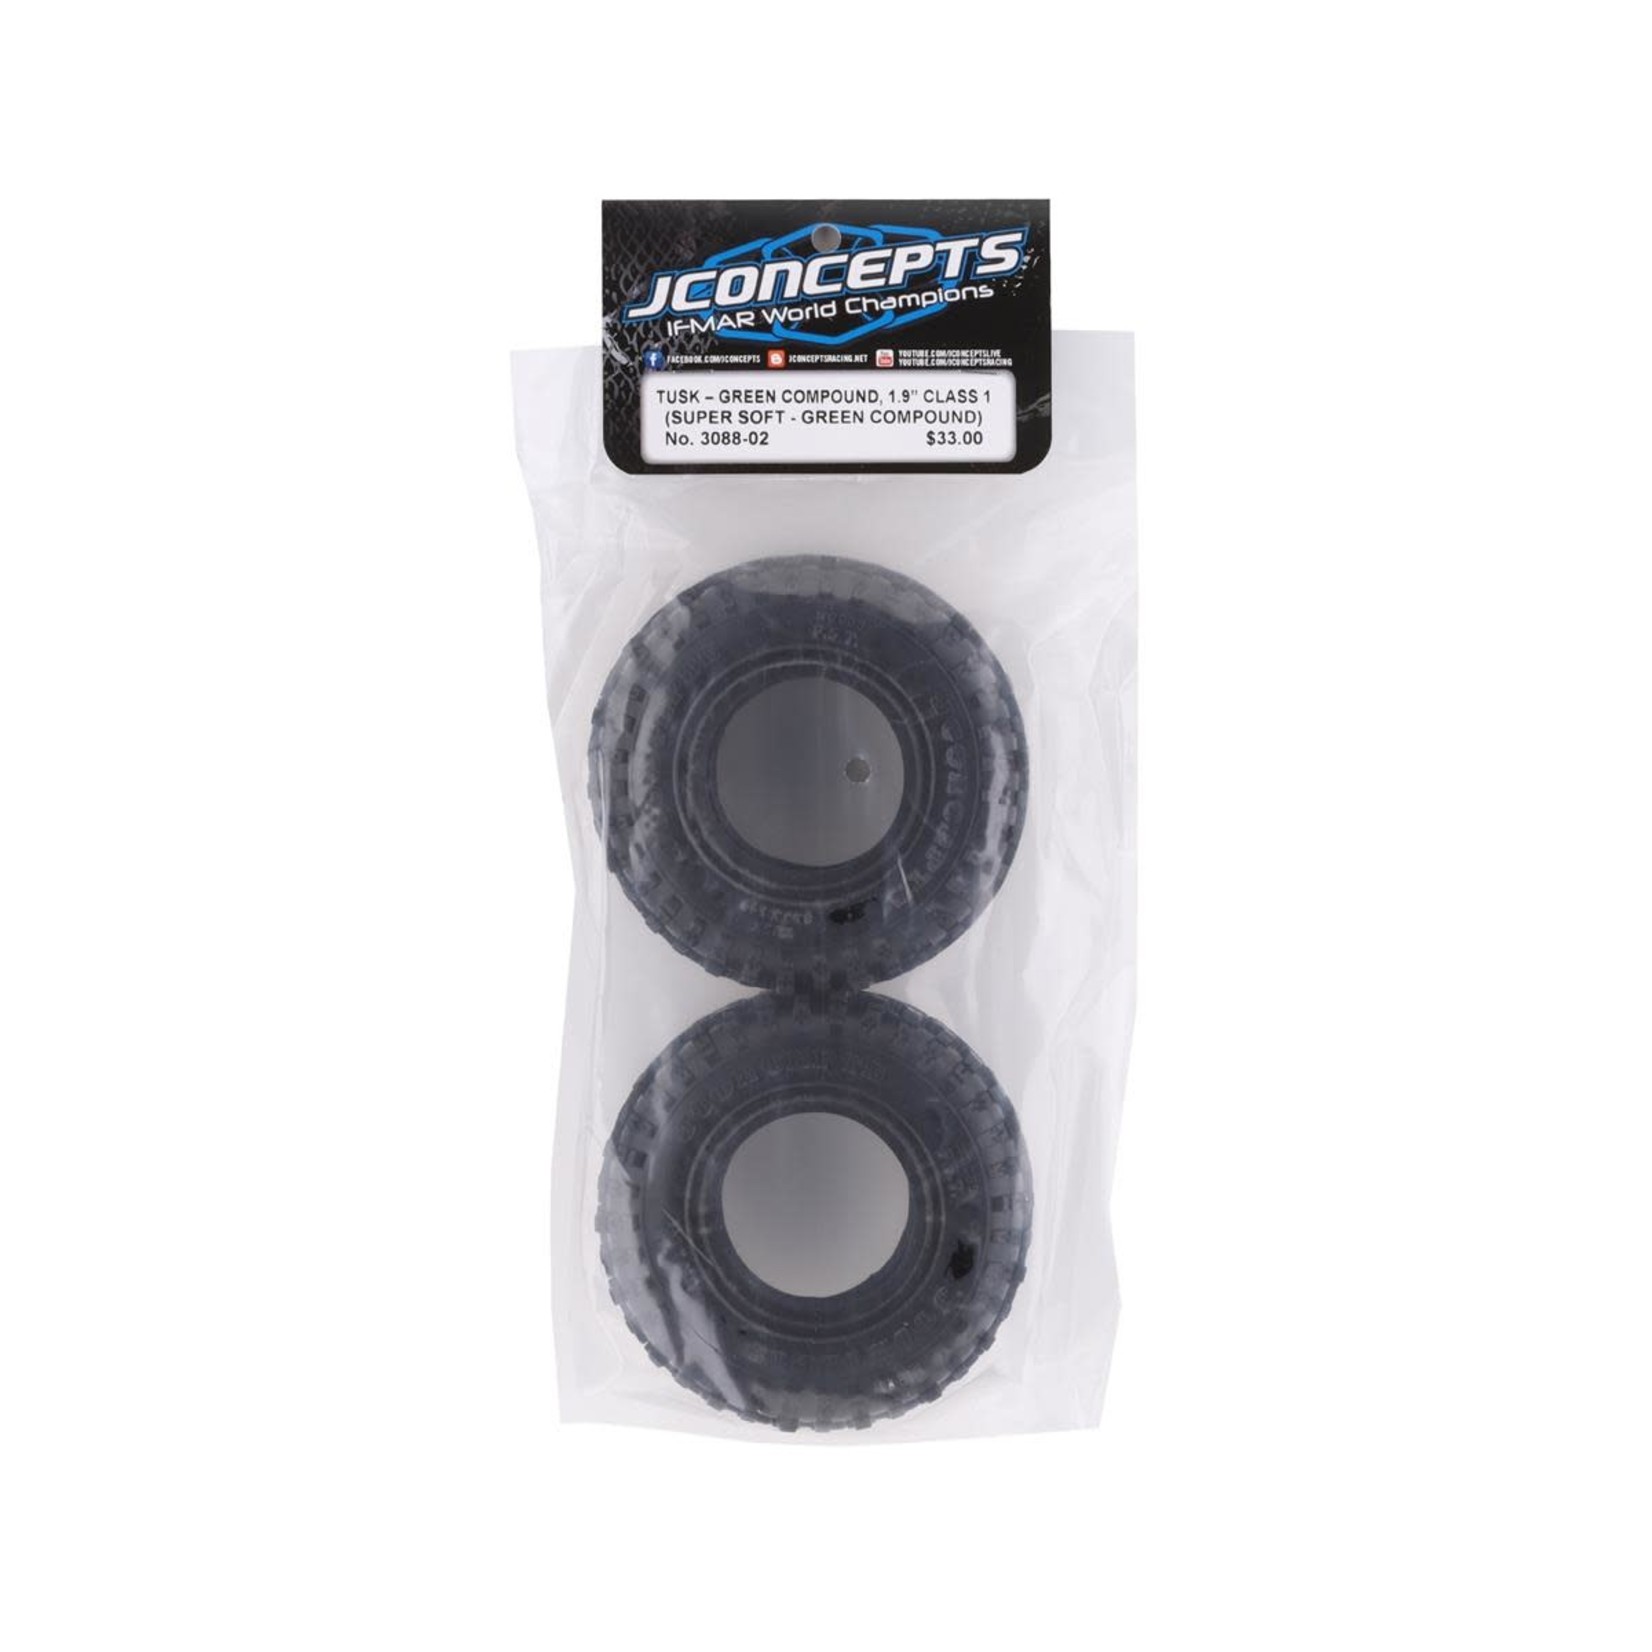 JConcepts JConcepts Tusk Scale Country 1.9" Class 1 Crawler Tires (3.93") (Green) #3088-02